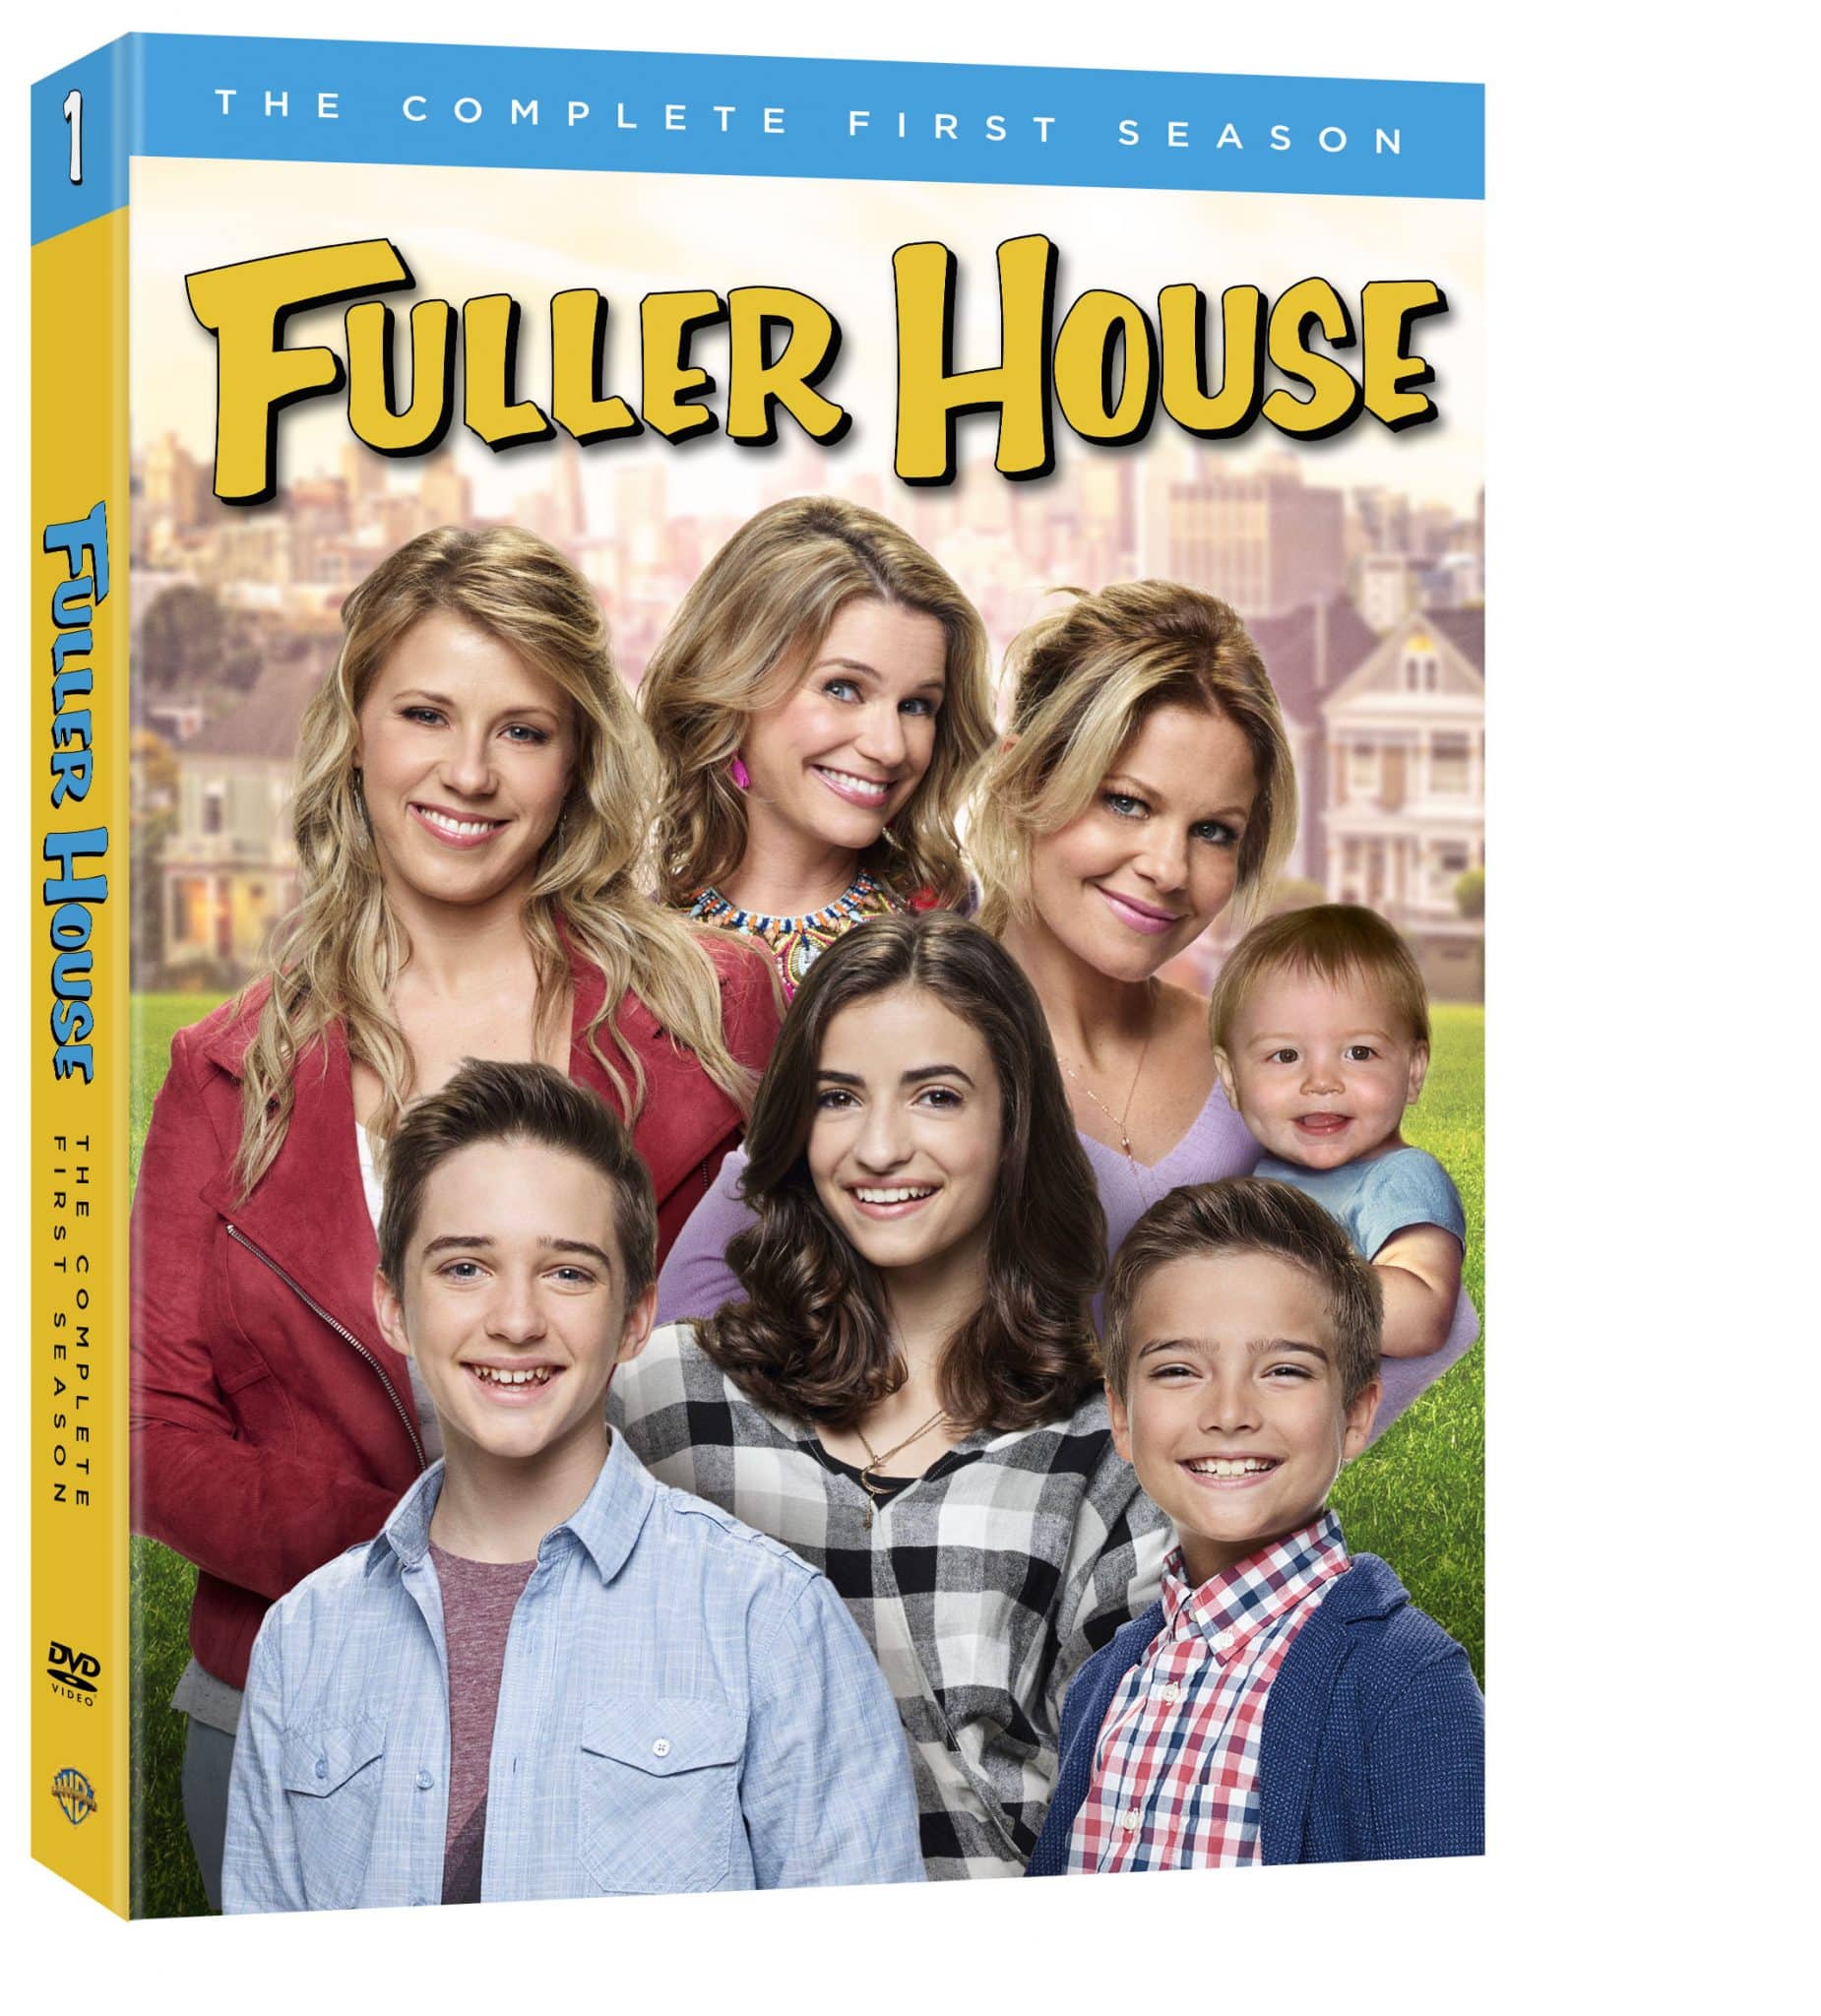 Fuller House: The Complete First Season Available on DVD Feb 28th!